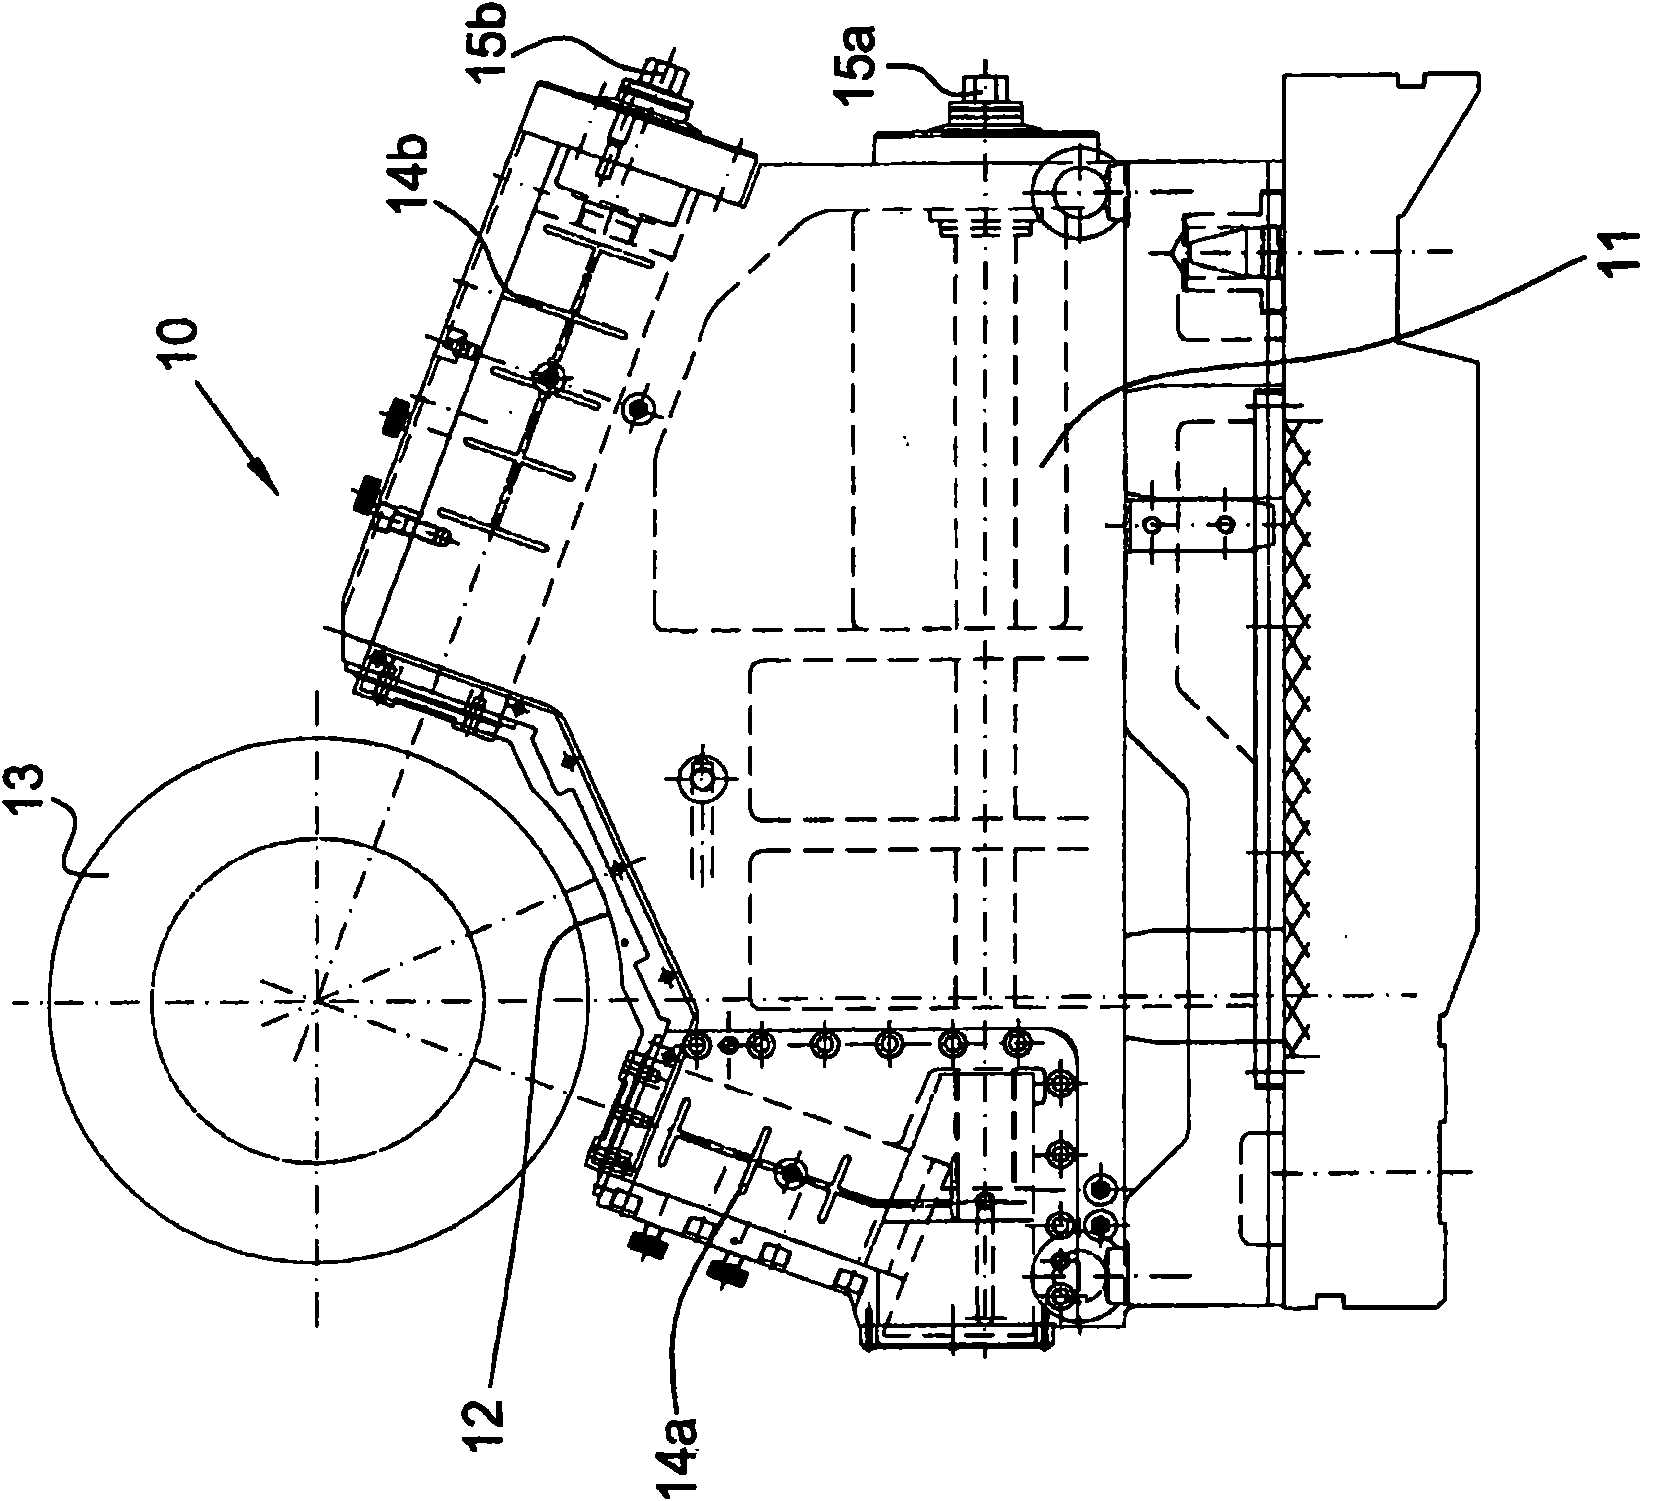 Device and method for positioning and blocking steady rests for rolling milly cylinders in grinding machines and grinding machines employing the same